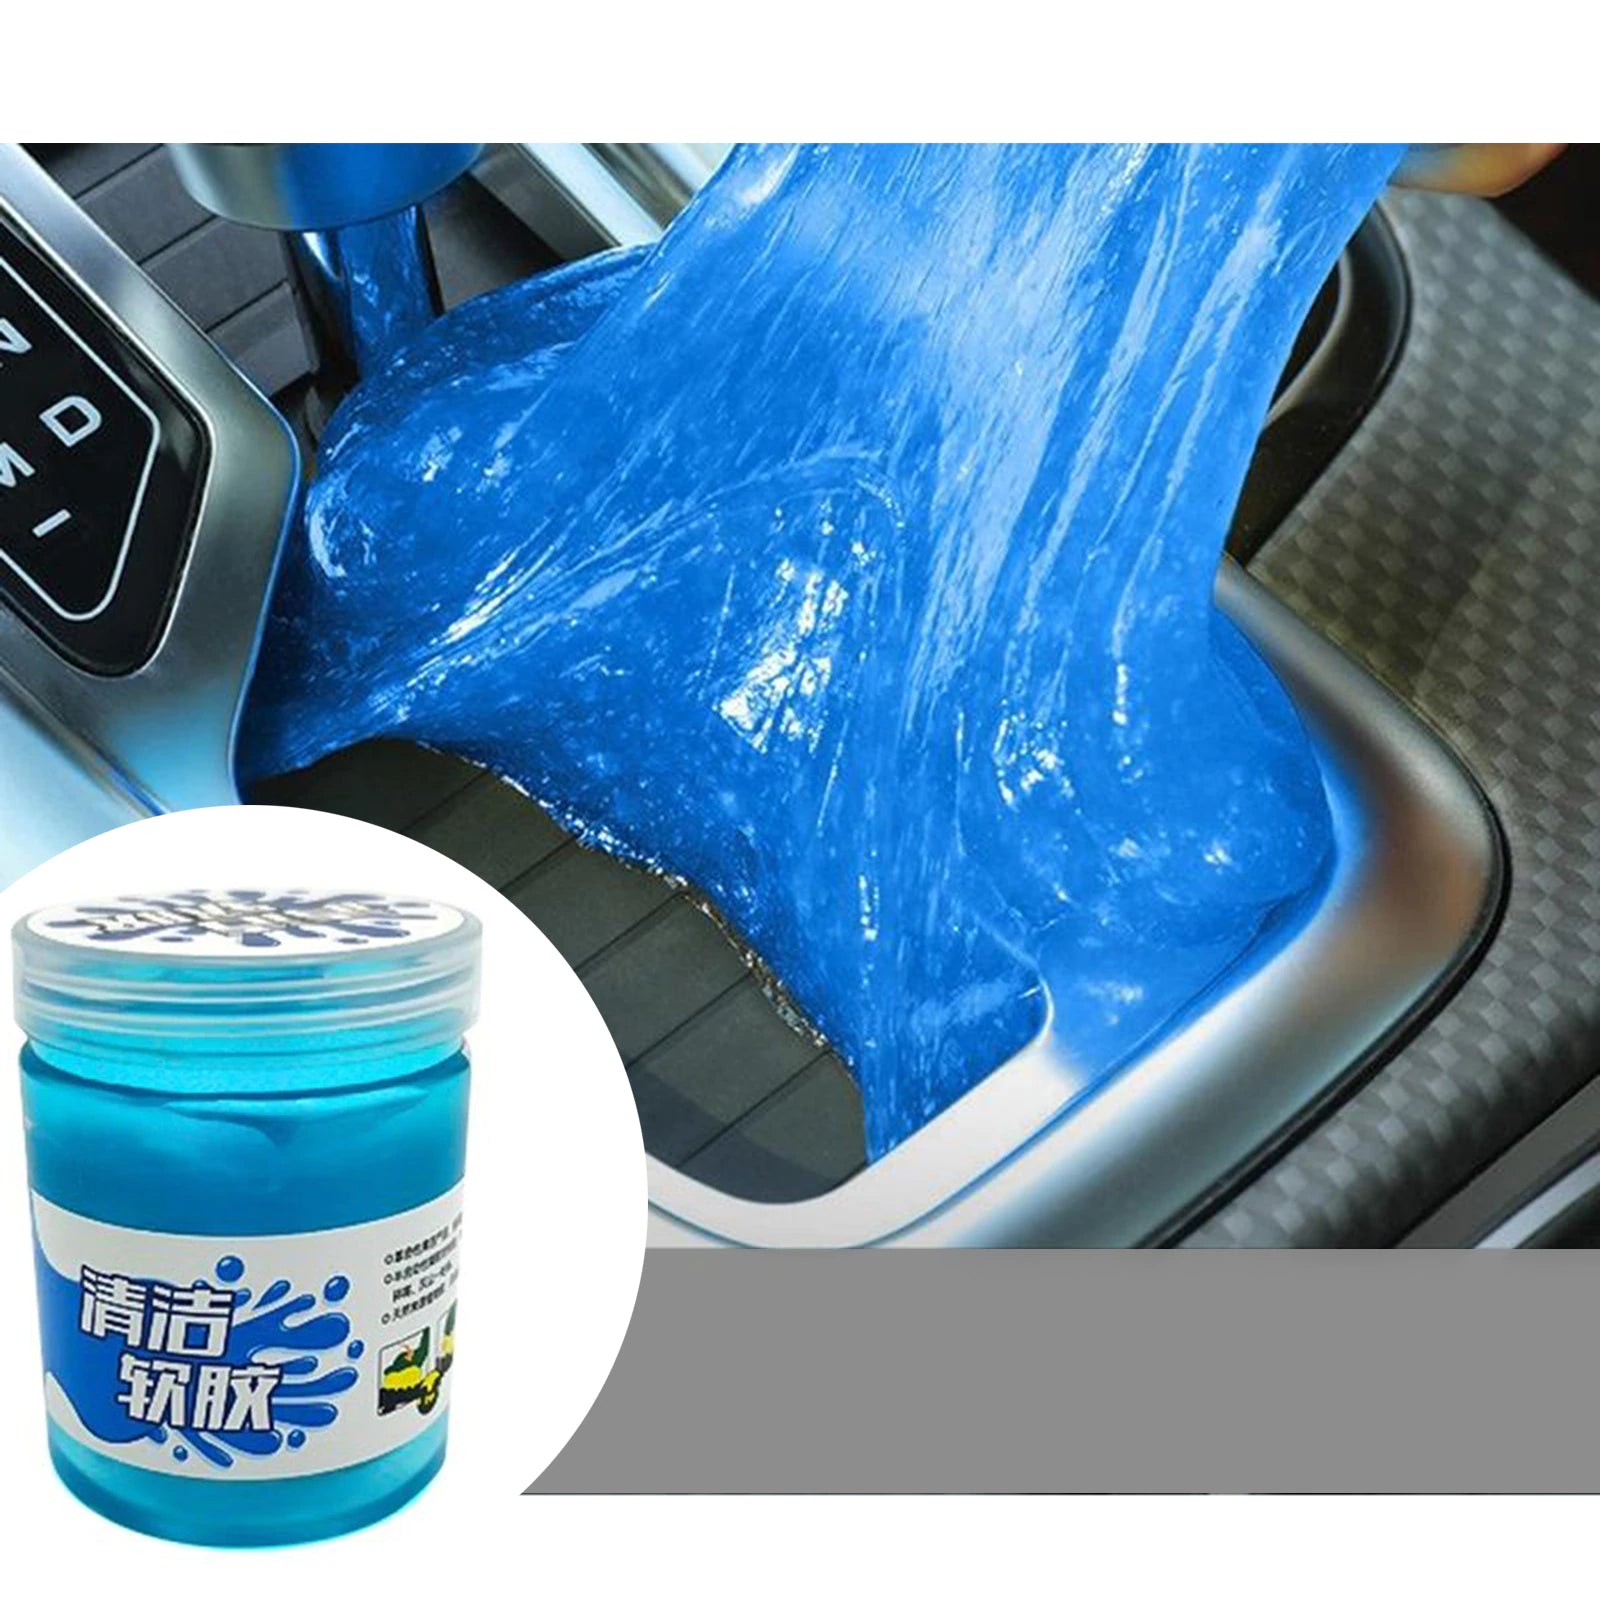 Professional title: "160g Auto Car Cleaning Pad Glue Air Outlet Powder Cleaner - Dust Remover Gel for Home, Car, and Computer Keyboard"